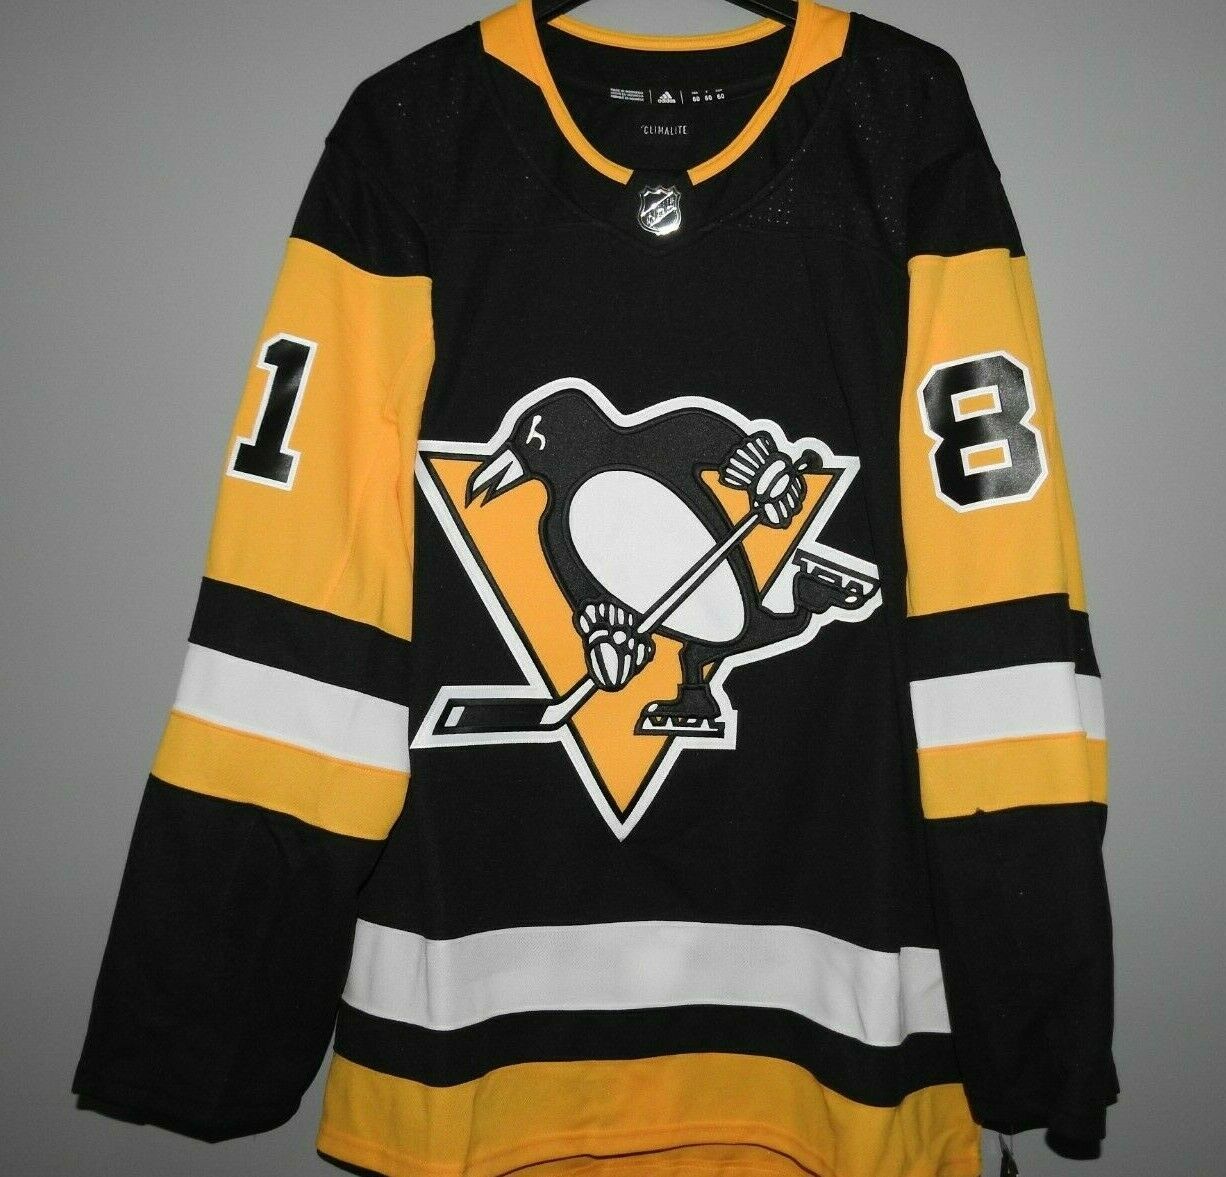 Authentic Adidas Nhl Pittsburgh Penguins #81 Hockey Jersey New Mens Sizes $230